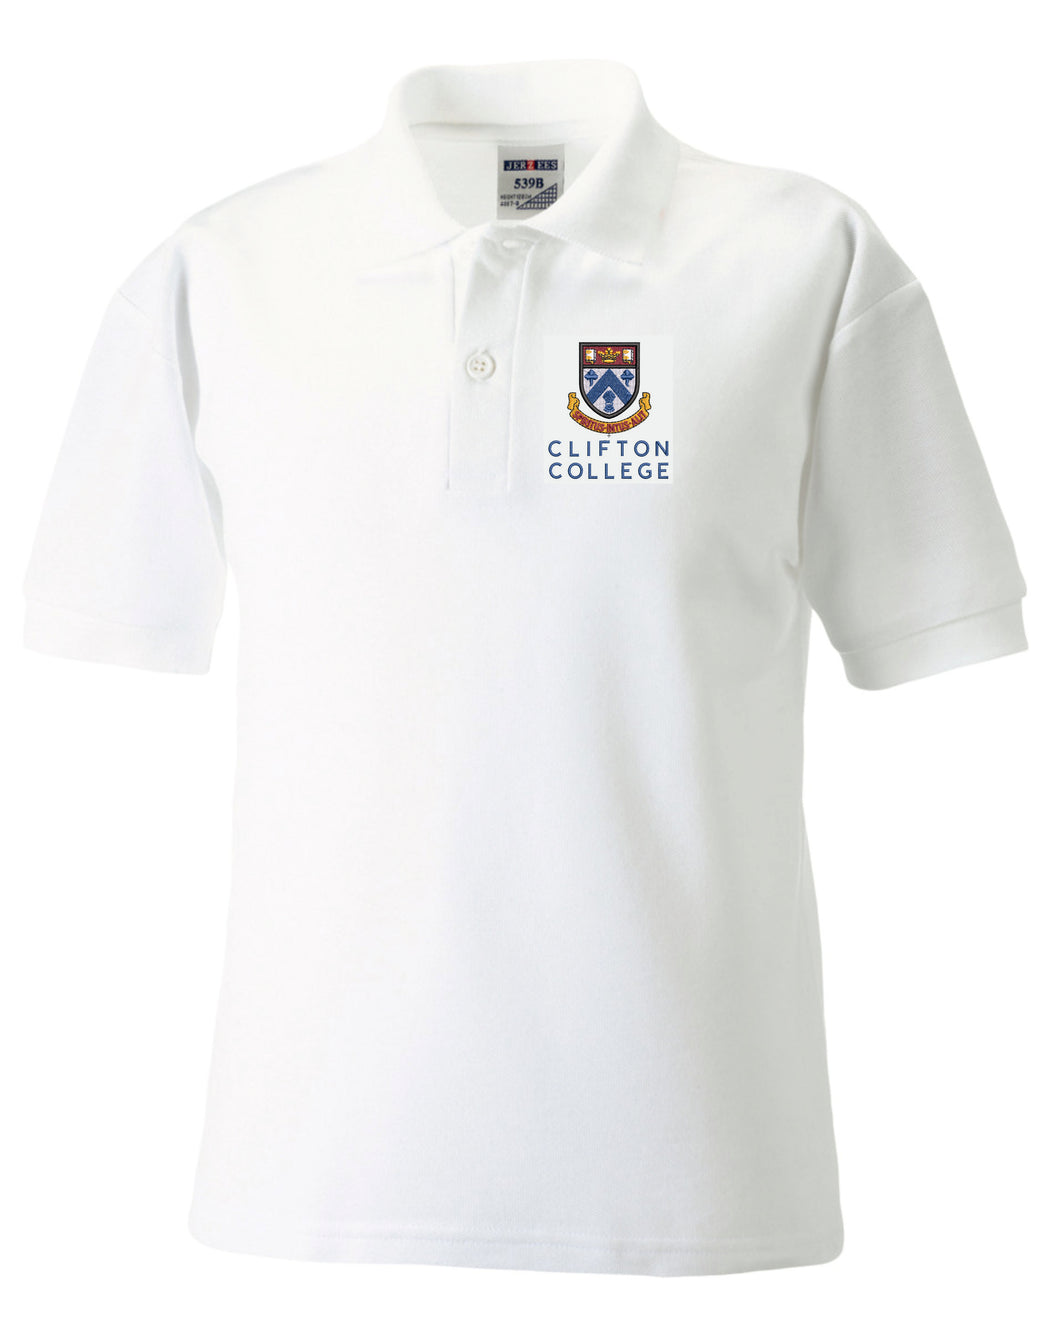 White Polo Shirt Crested (for indoor PE)